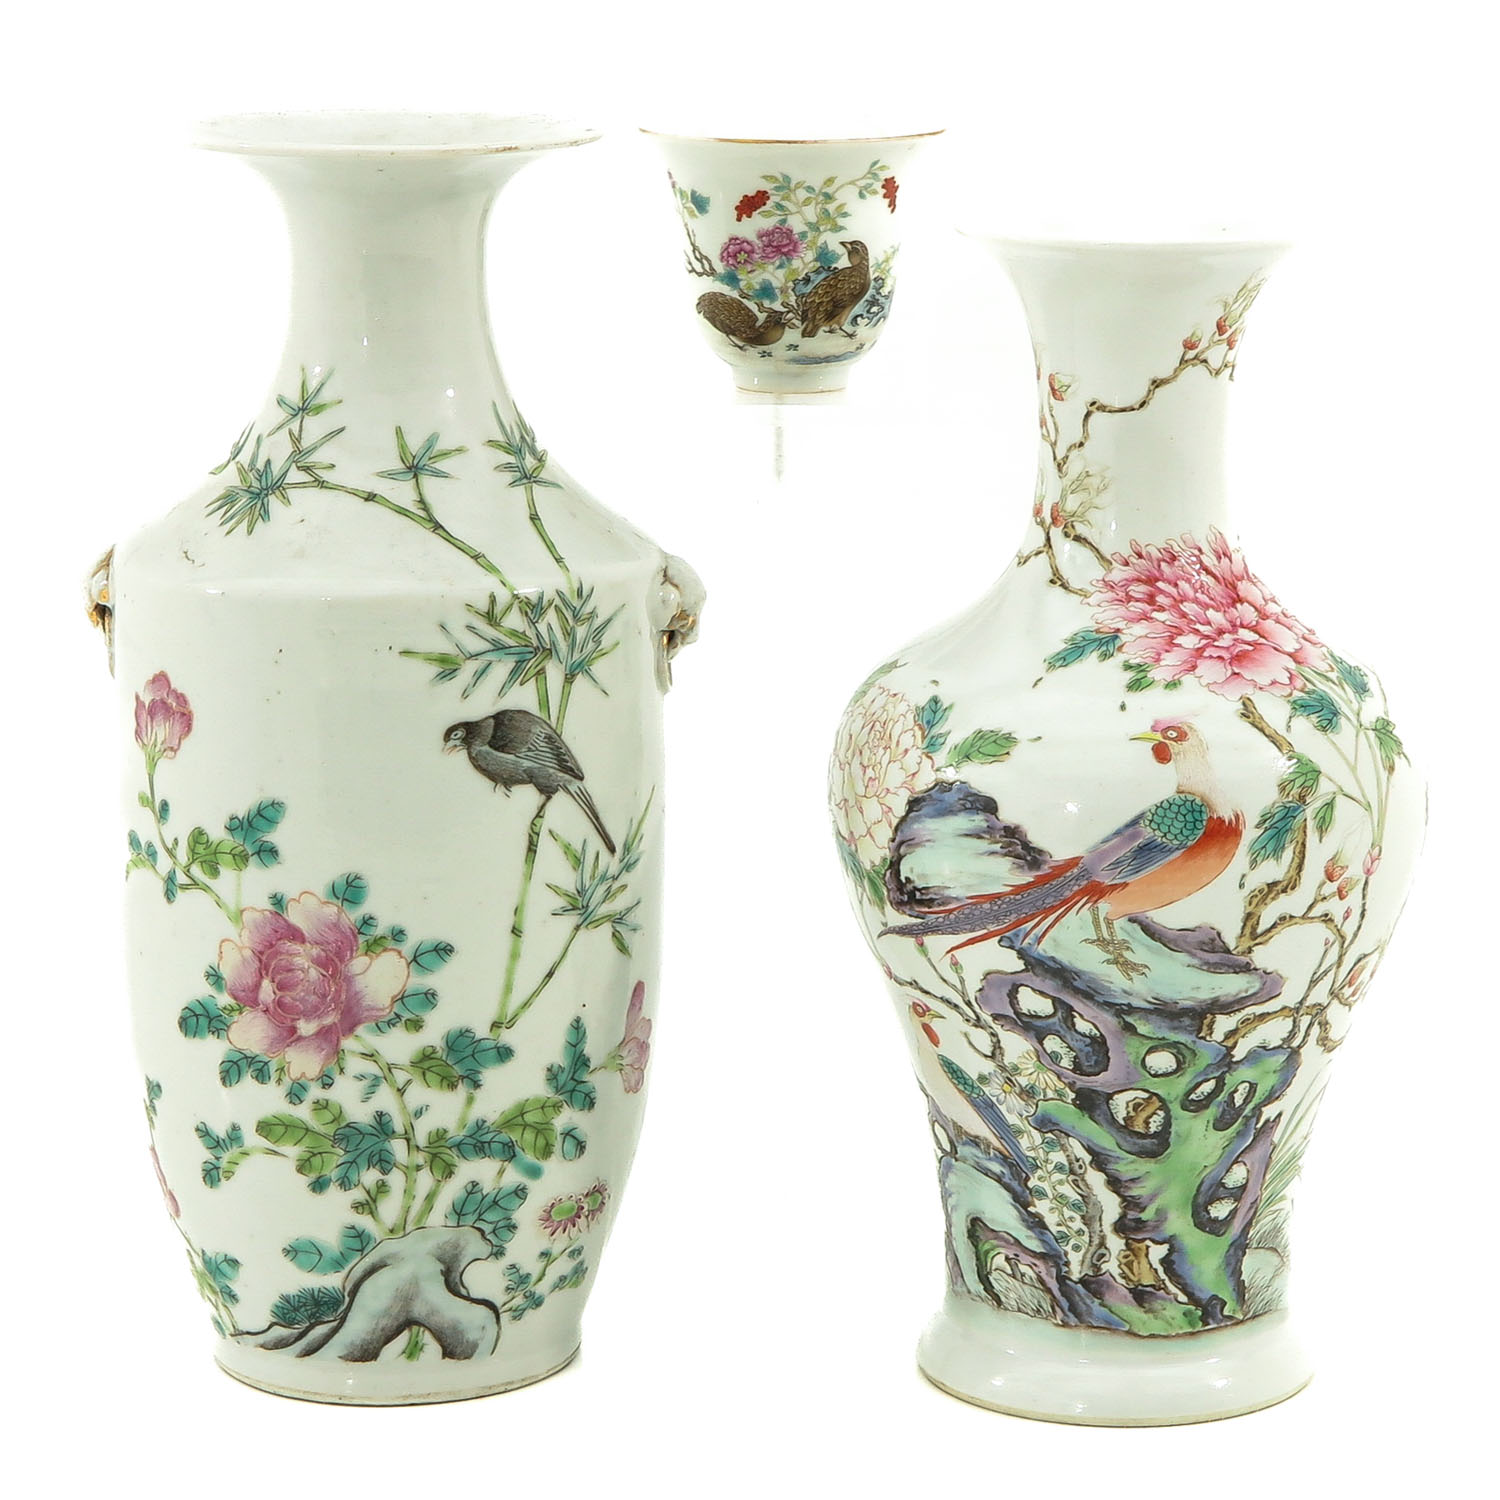 A Collection of Famille Rose Porcelain